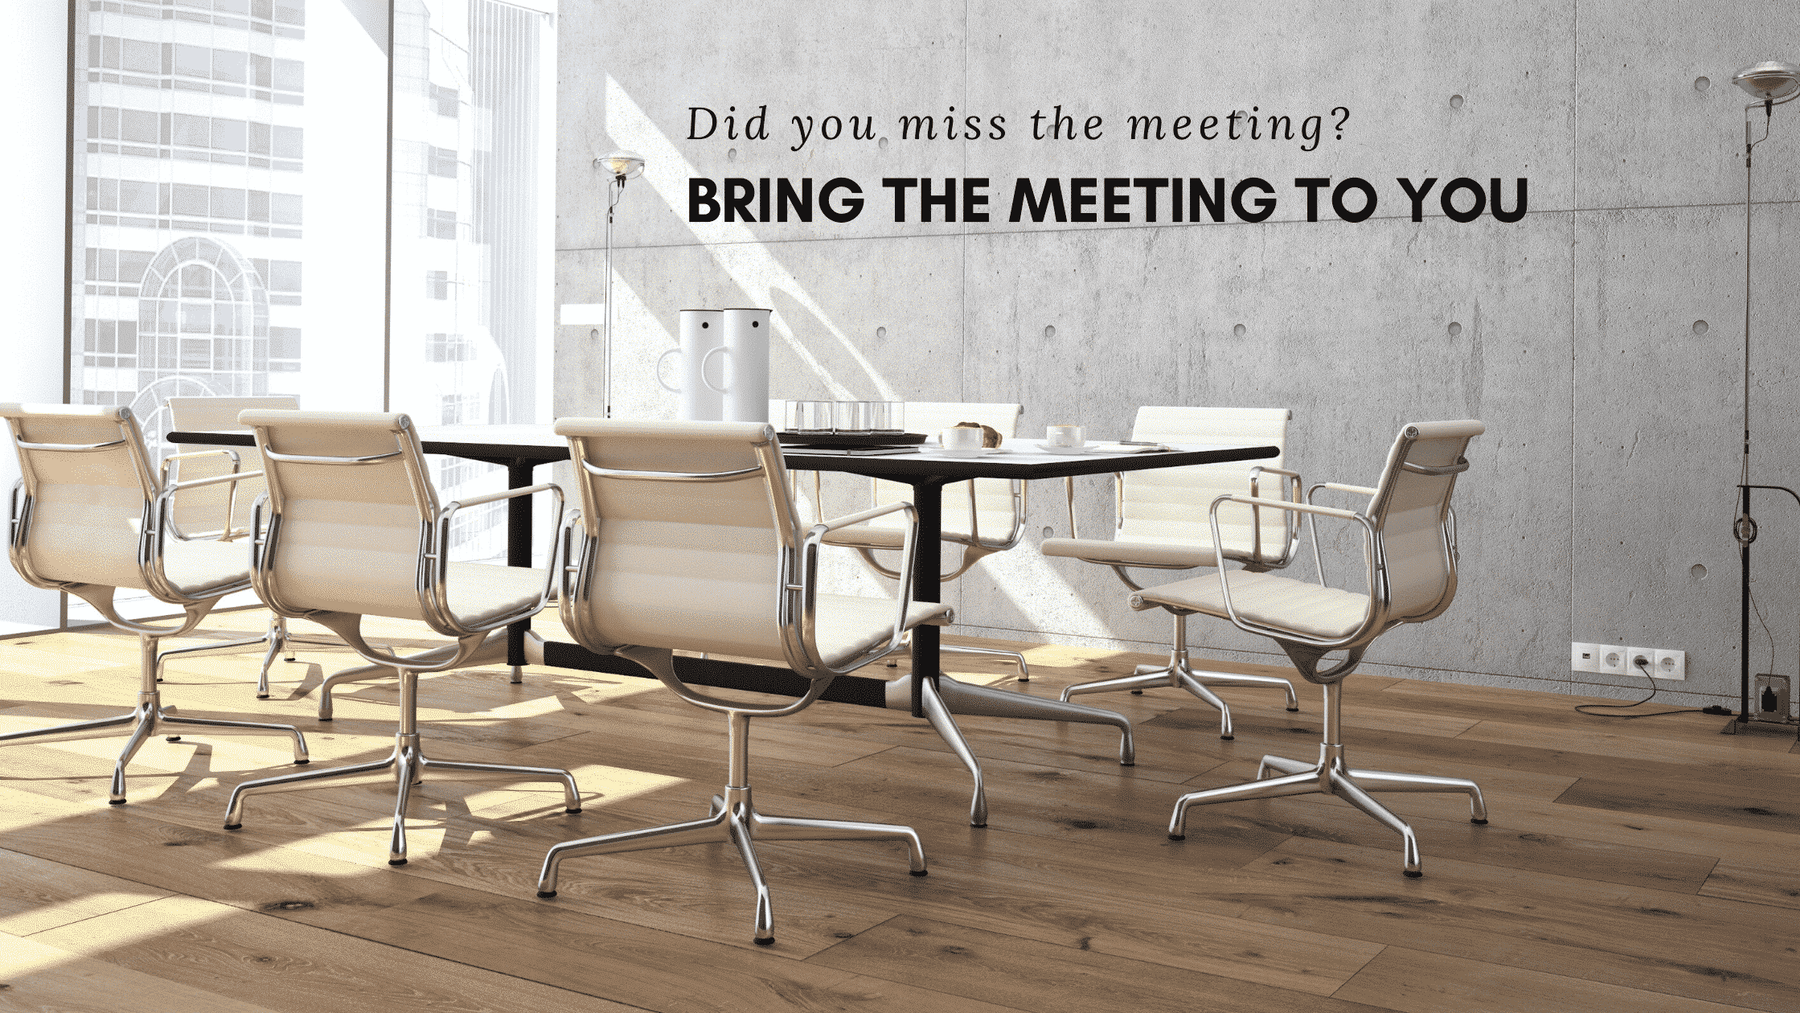 How to bring a meeting to those who missed it.